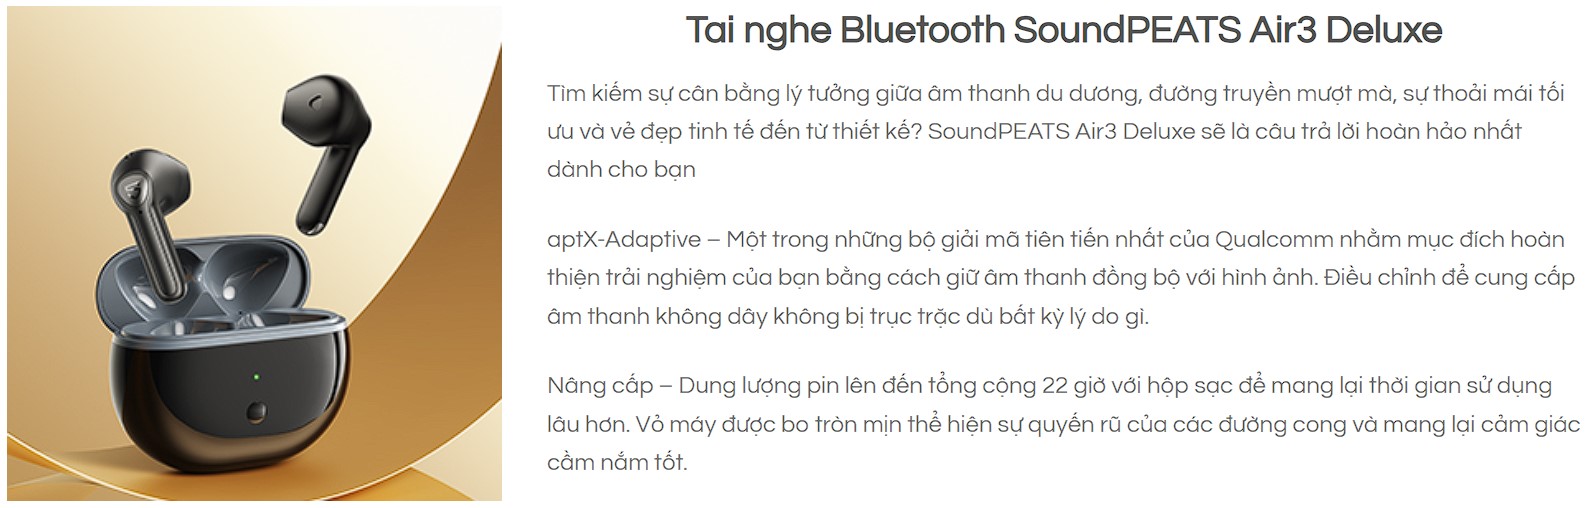 Tai nghe Bluetooth Soundpeats Air 3 Deluxe